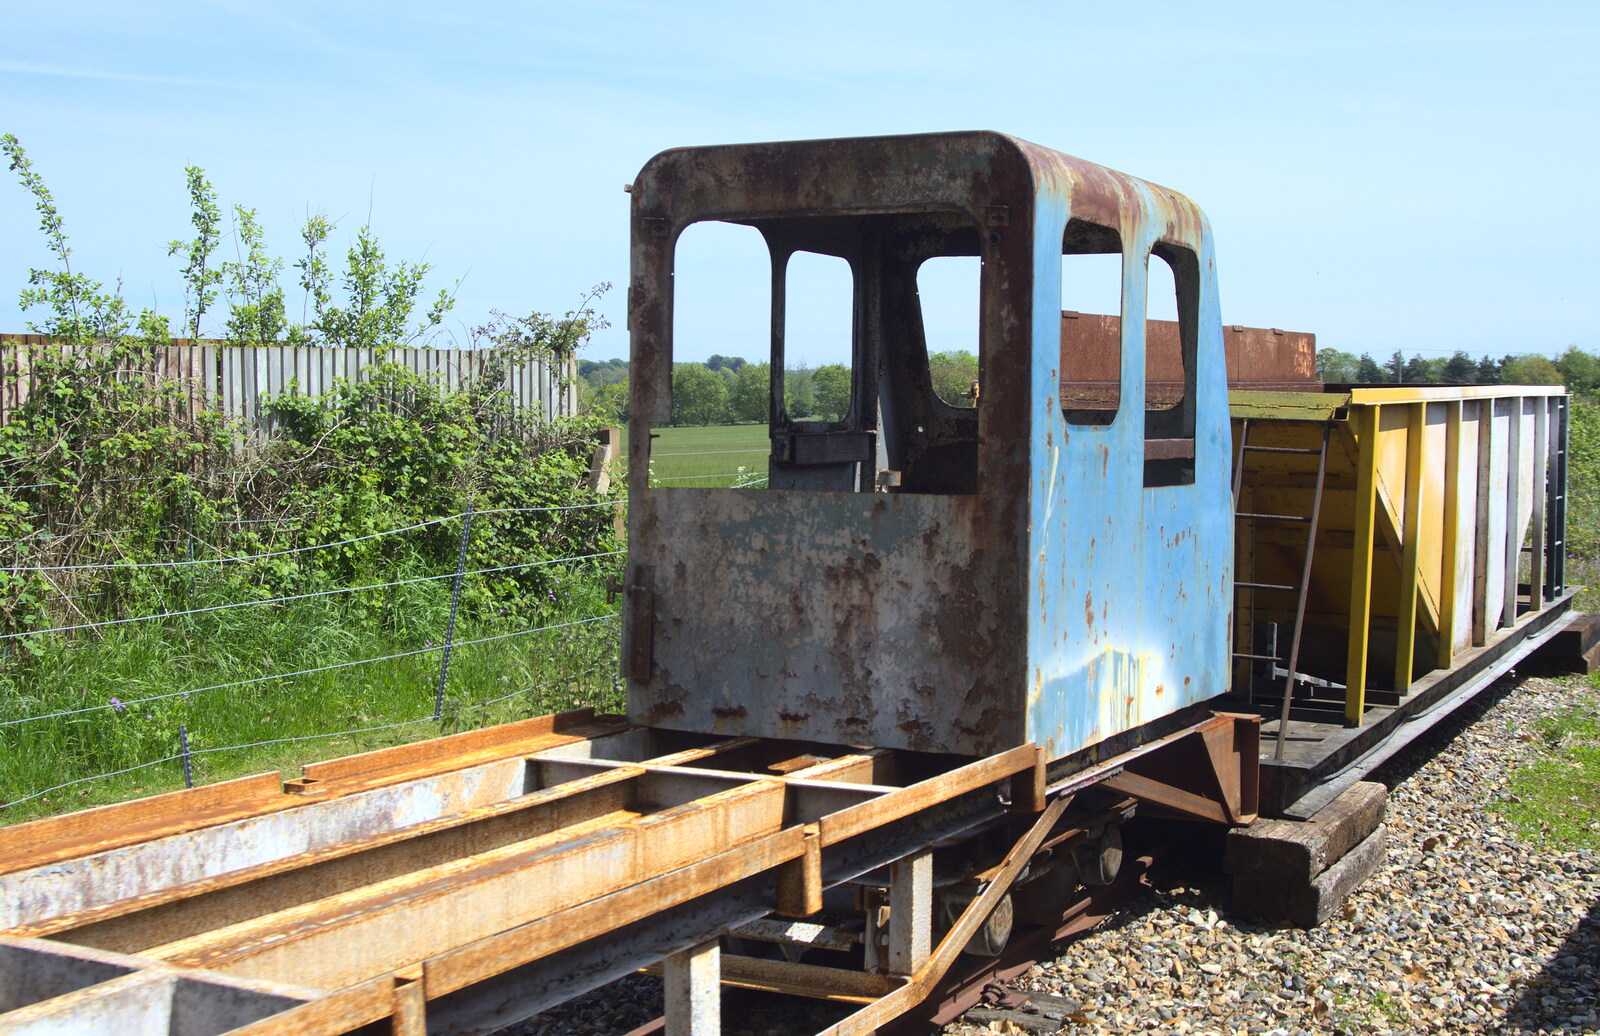 Some bit of derelict train from The Bure Valley Railway, Aylsham, Norfolk - 26th May 2013